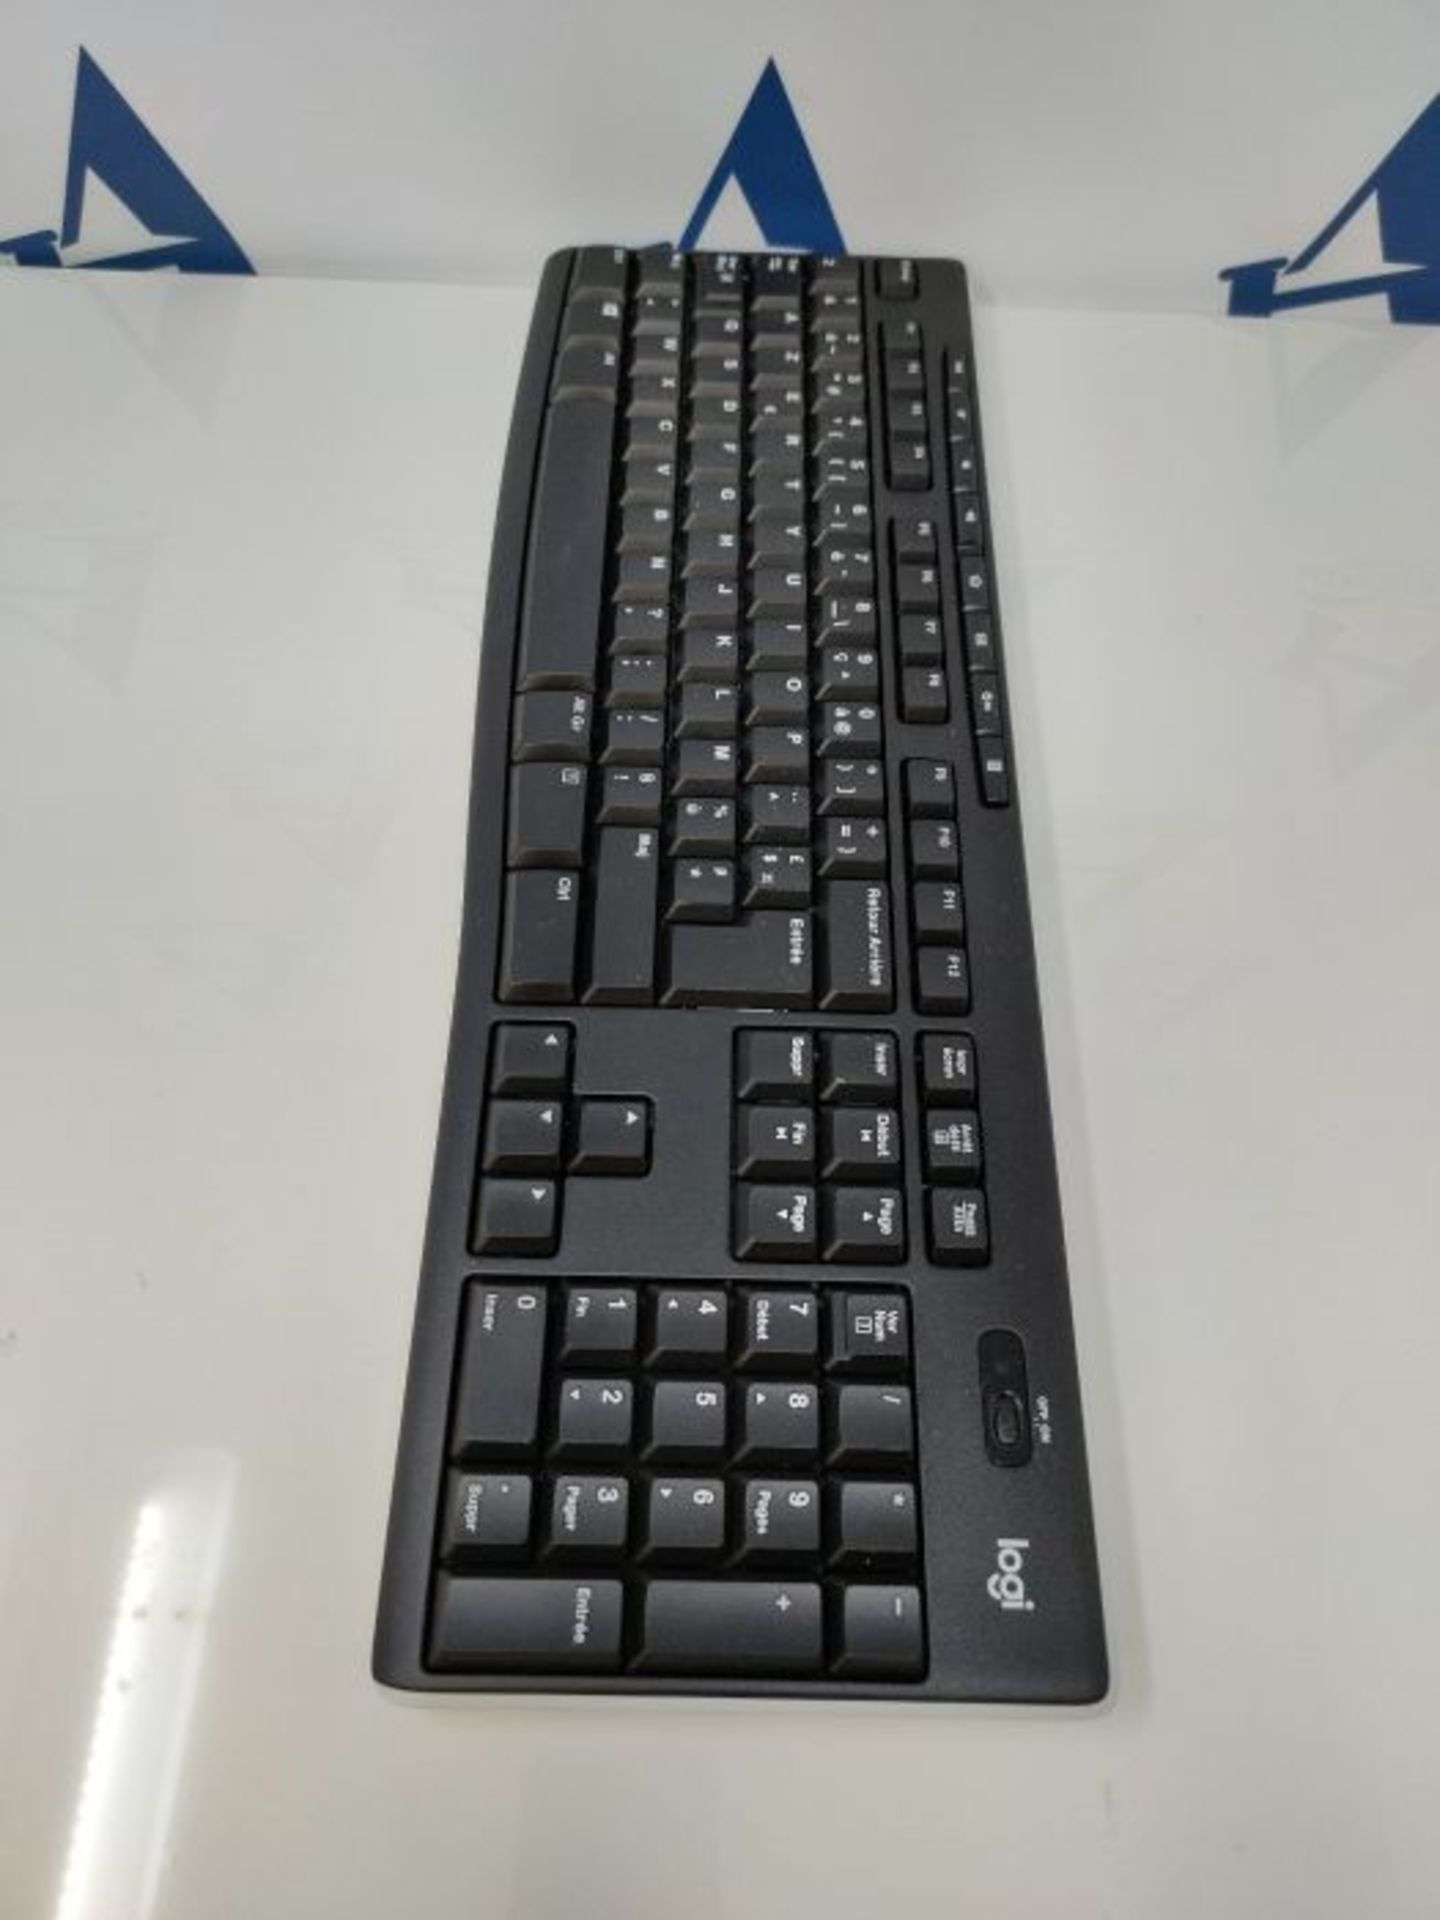 [INCOMPLETE] Logitech K270 Wireless Keyboard for Windows, AZERTY French Layout - Black - Image 3 of 3